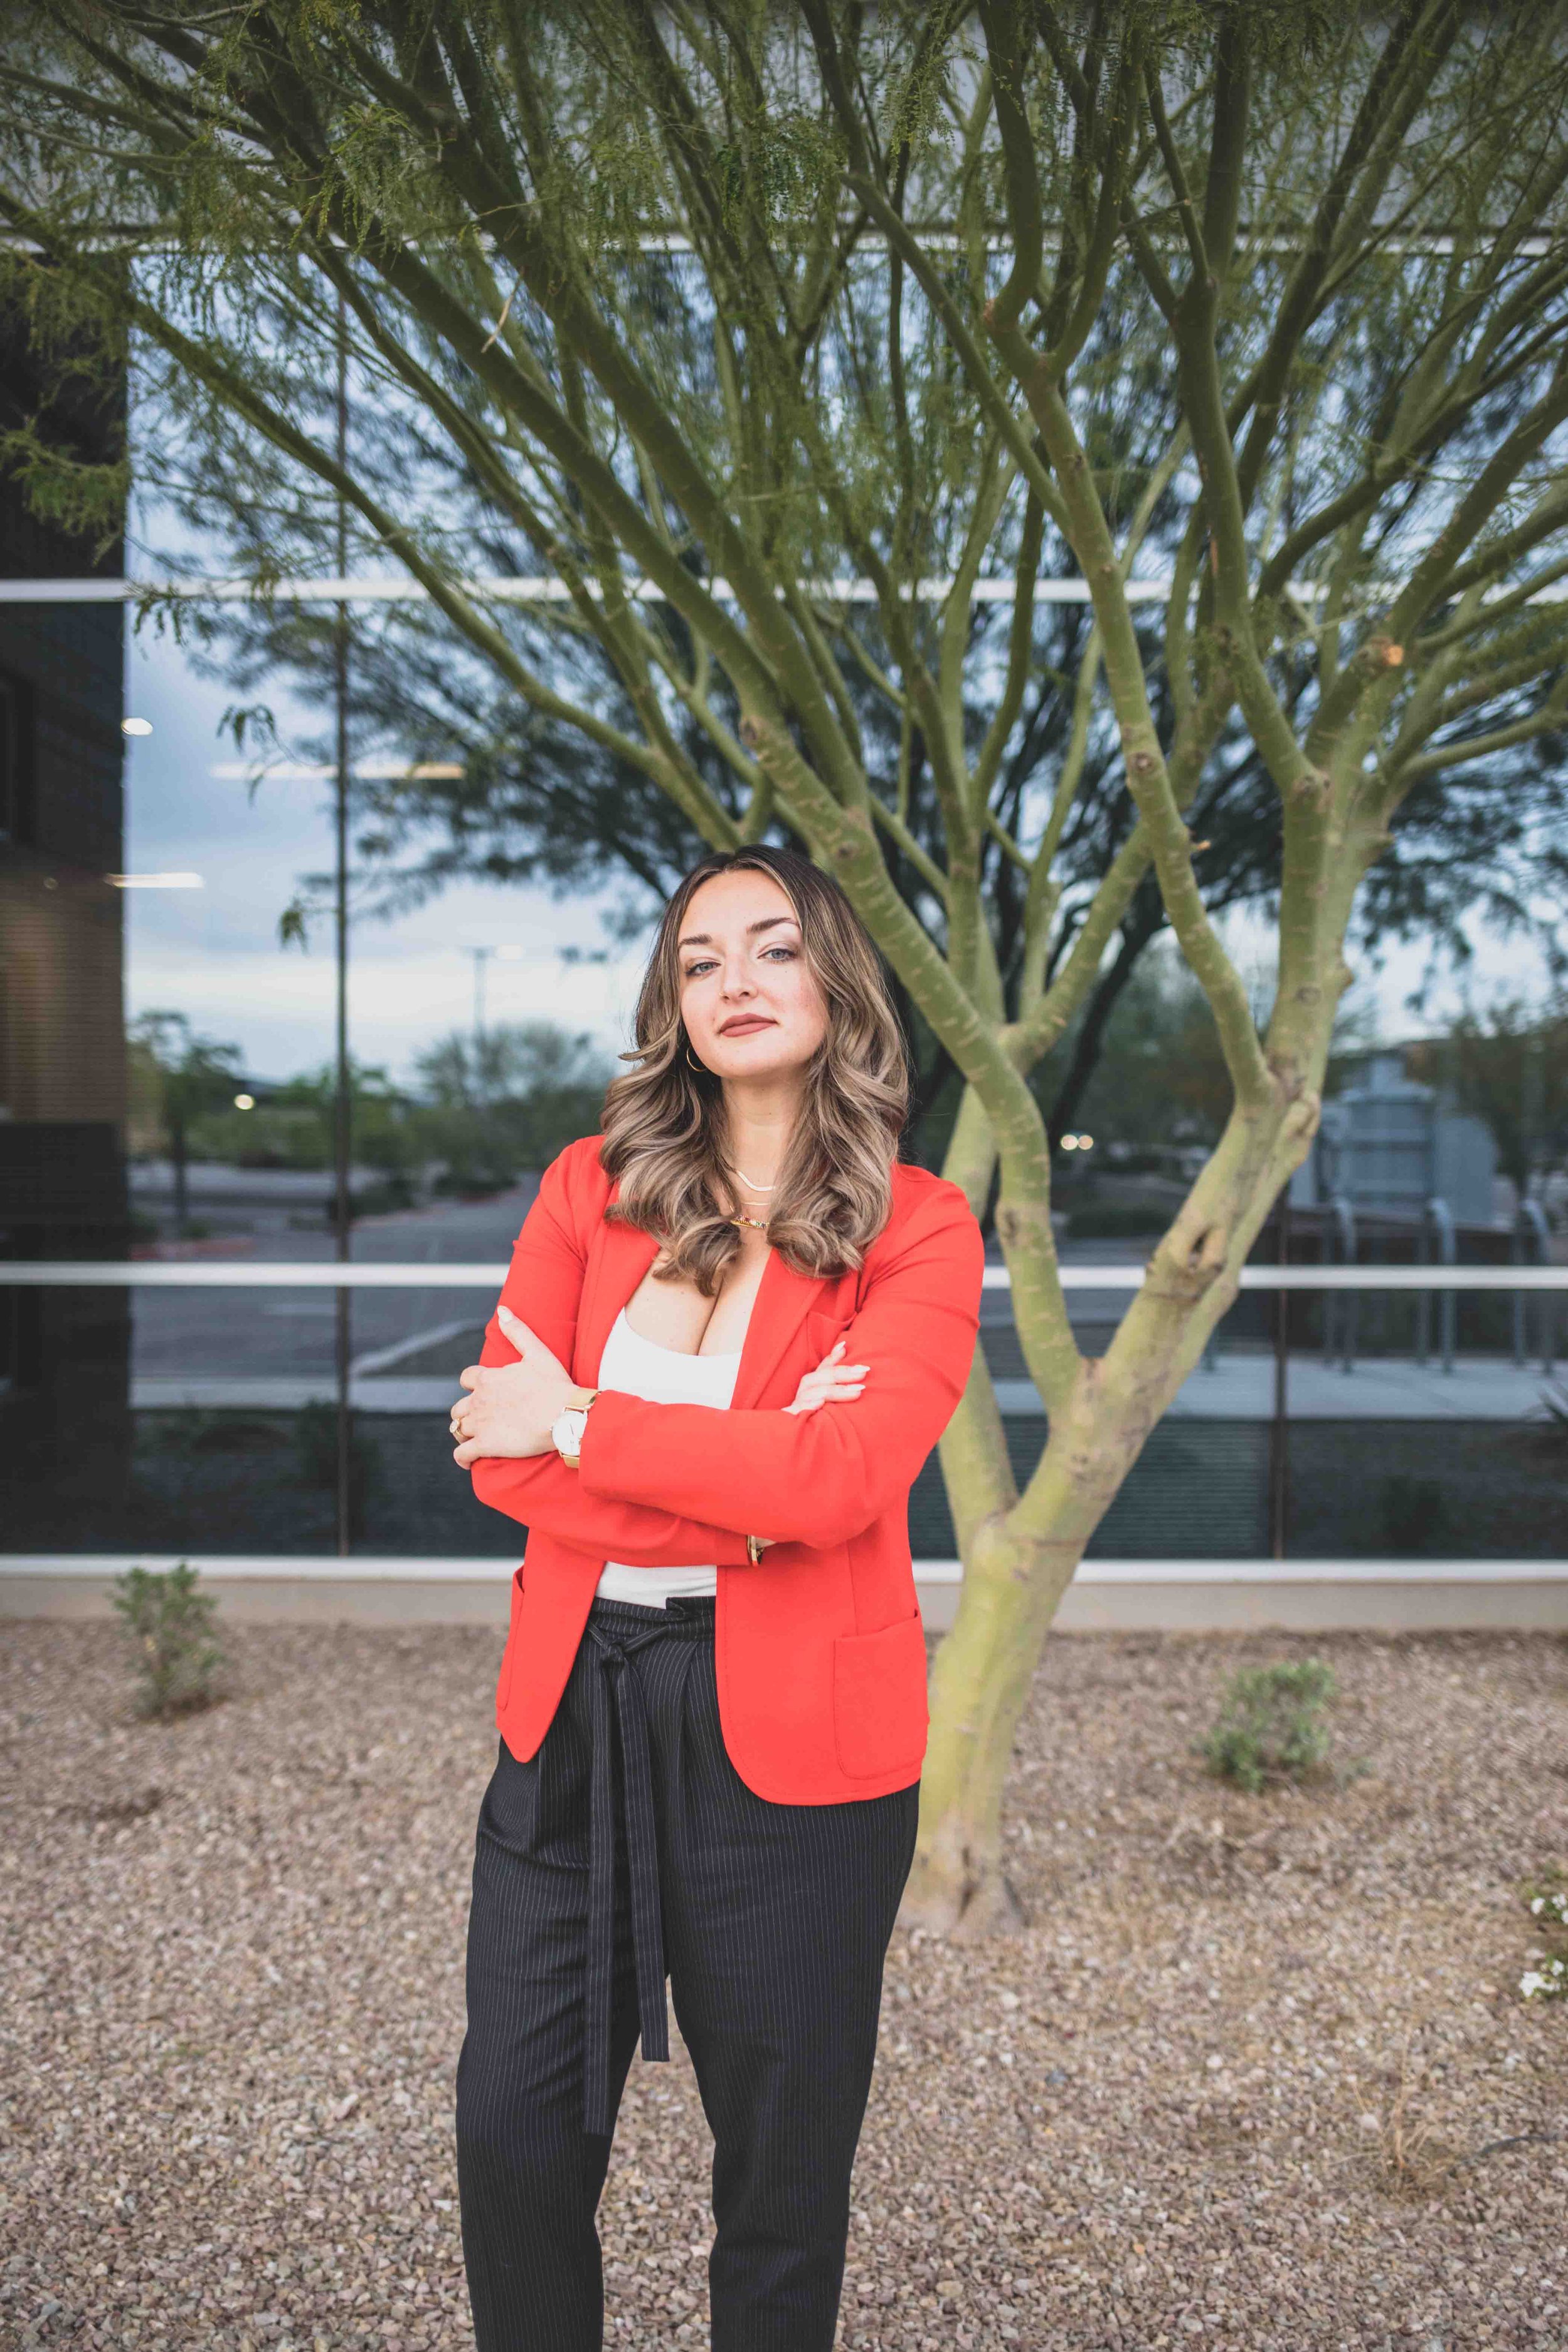 Naturopathic Doctor poses in front of Palo Verde Tree in front of office complex in Gilbert, Arizona by Phoenix based Branding Photographer, Jennifer Lind Schutsky.